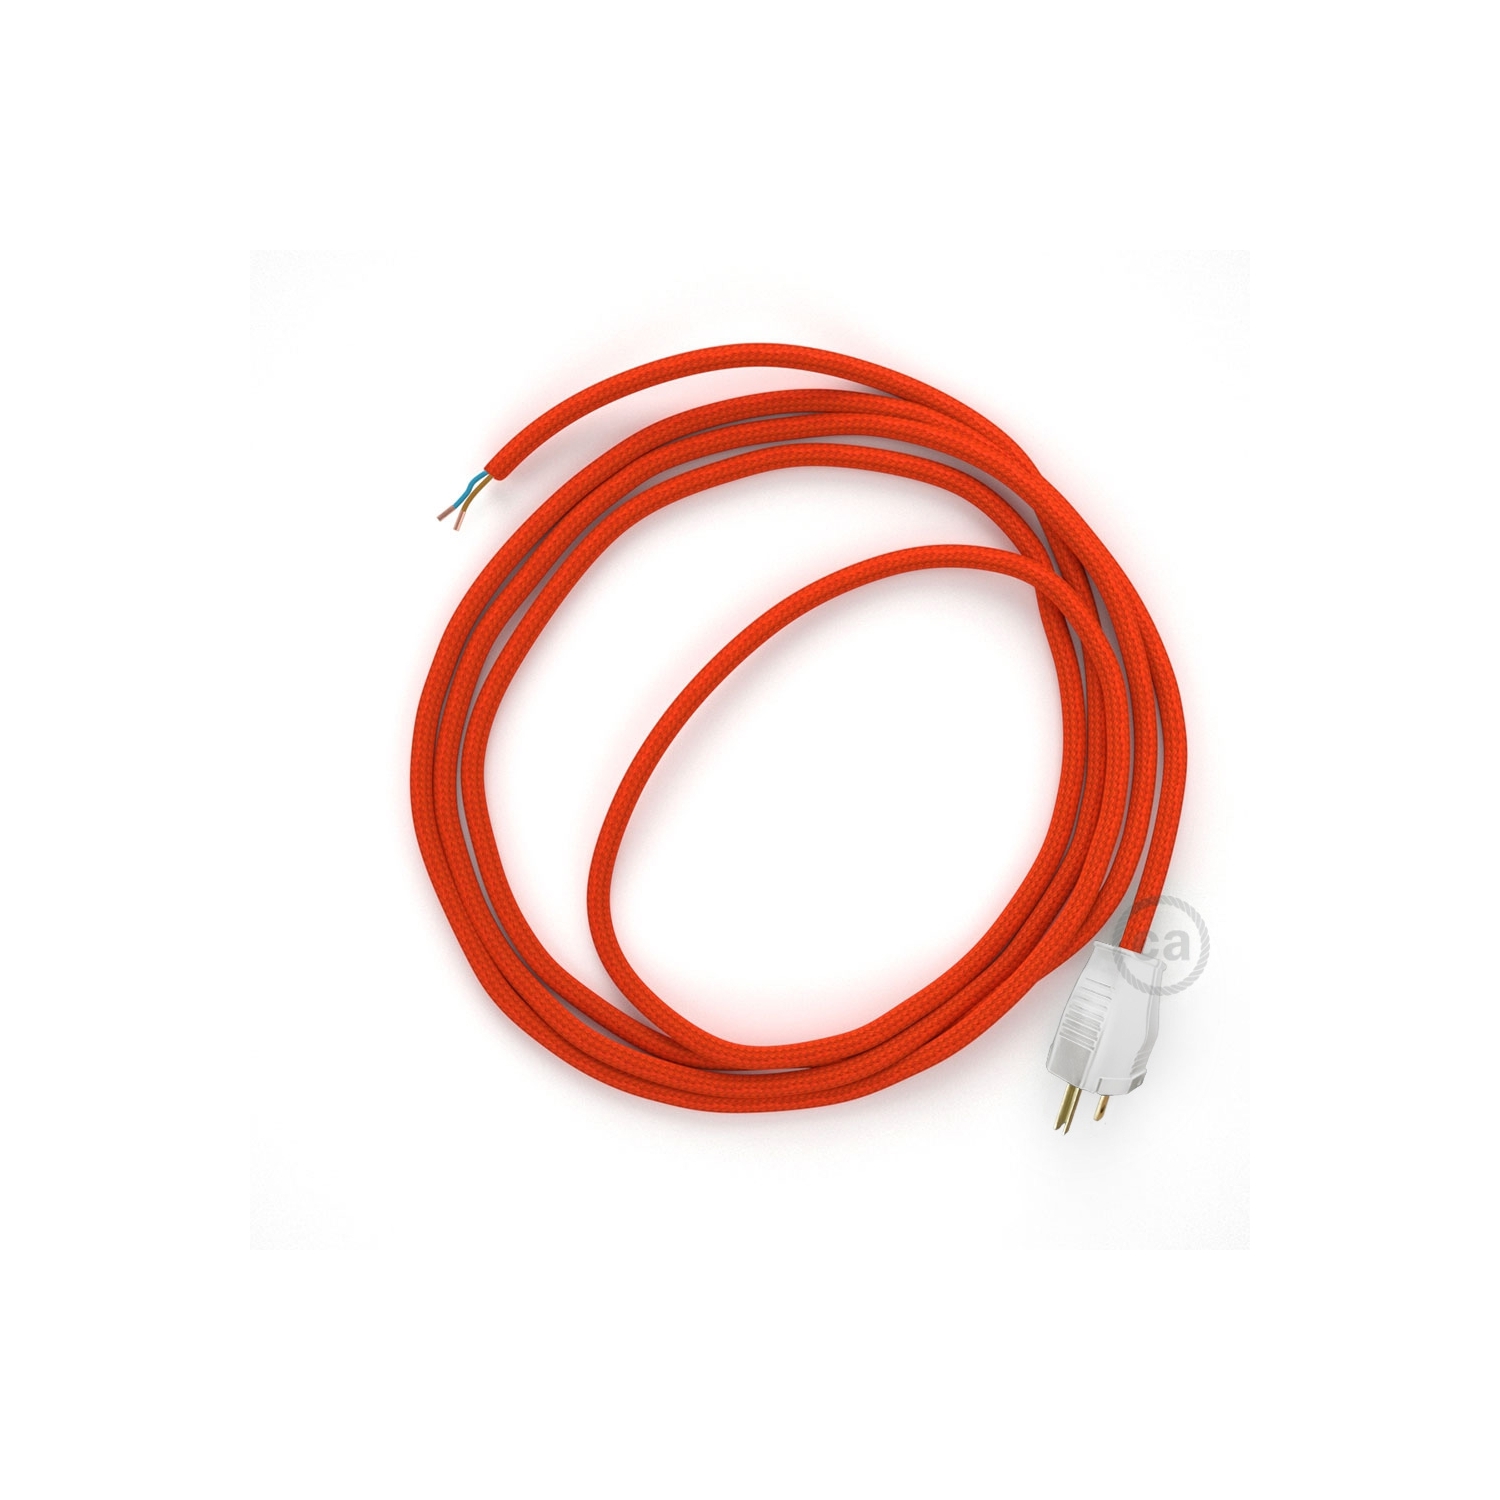 Cord-set - RM15 Orange Rayon Covered Round Cable